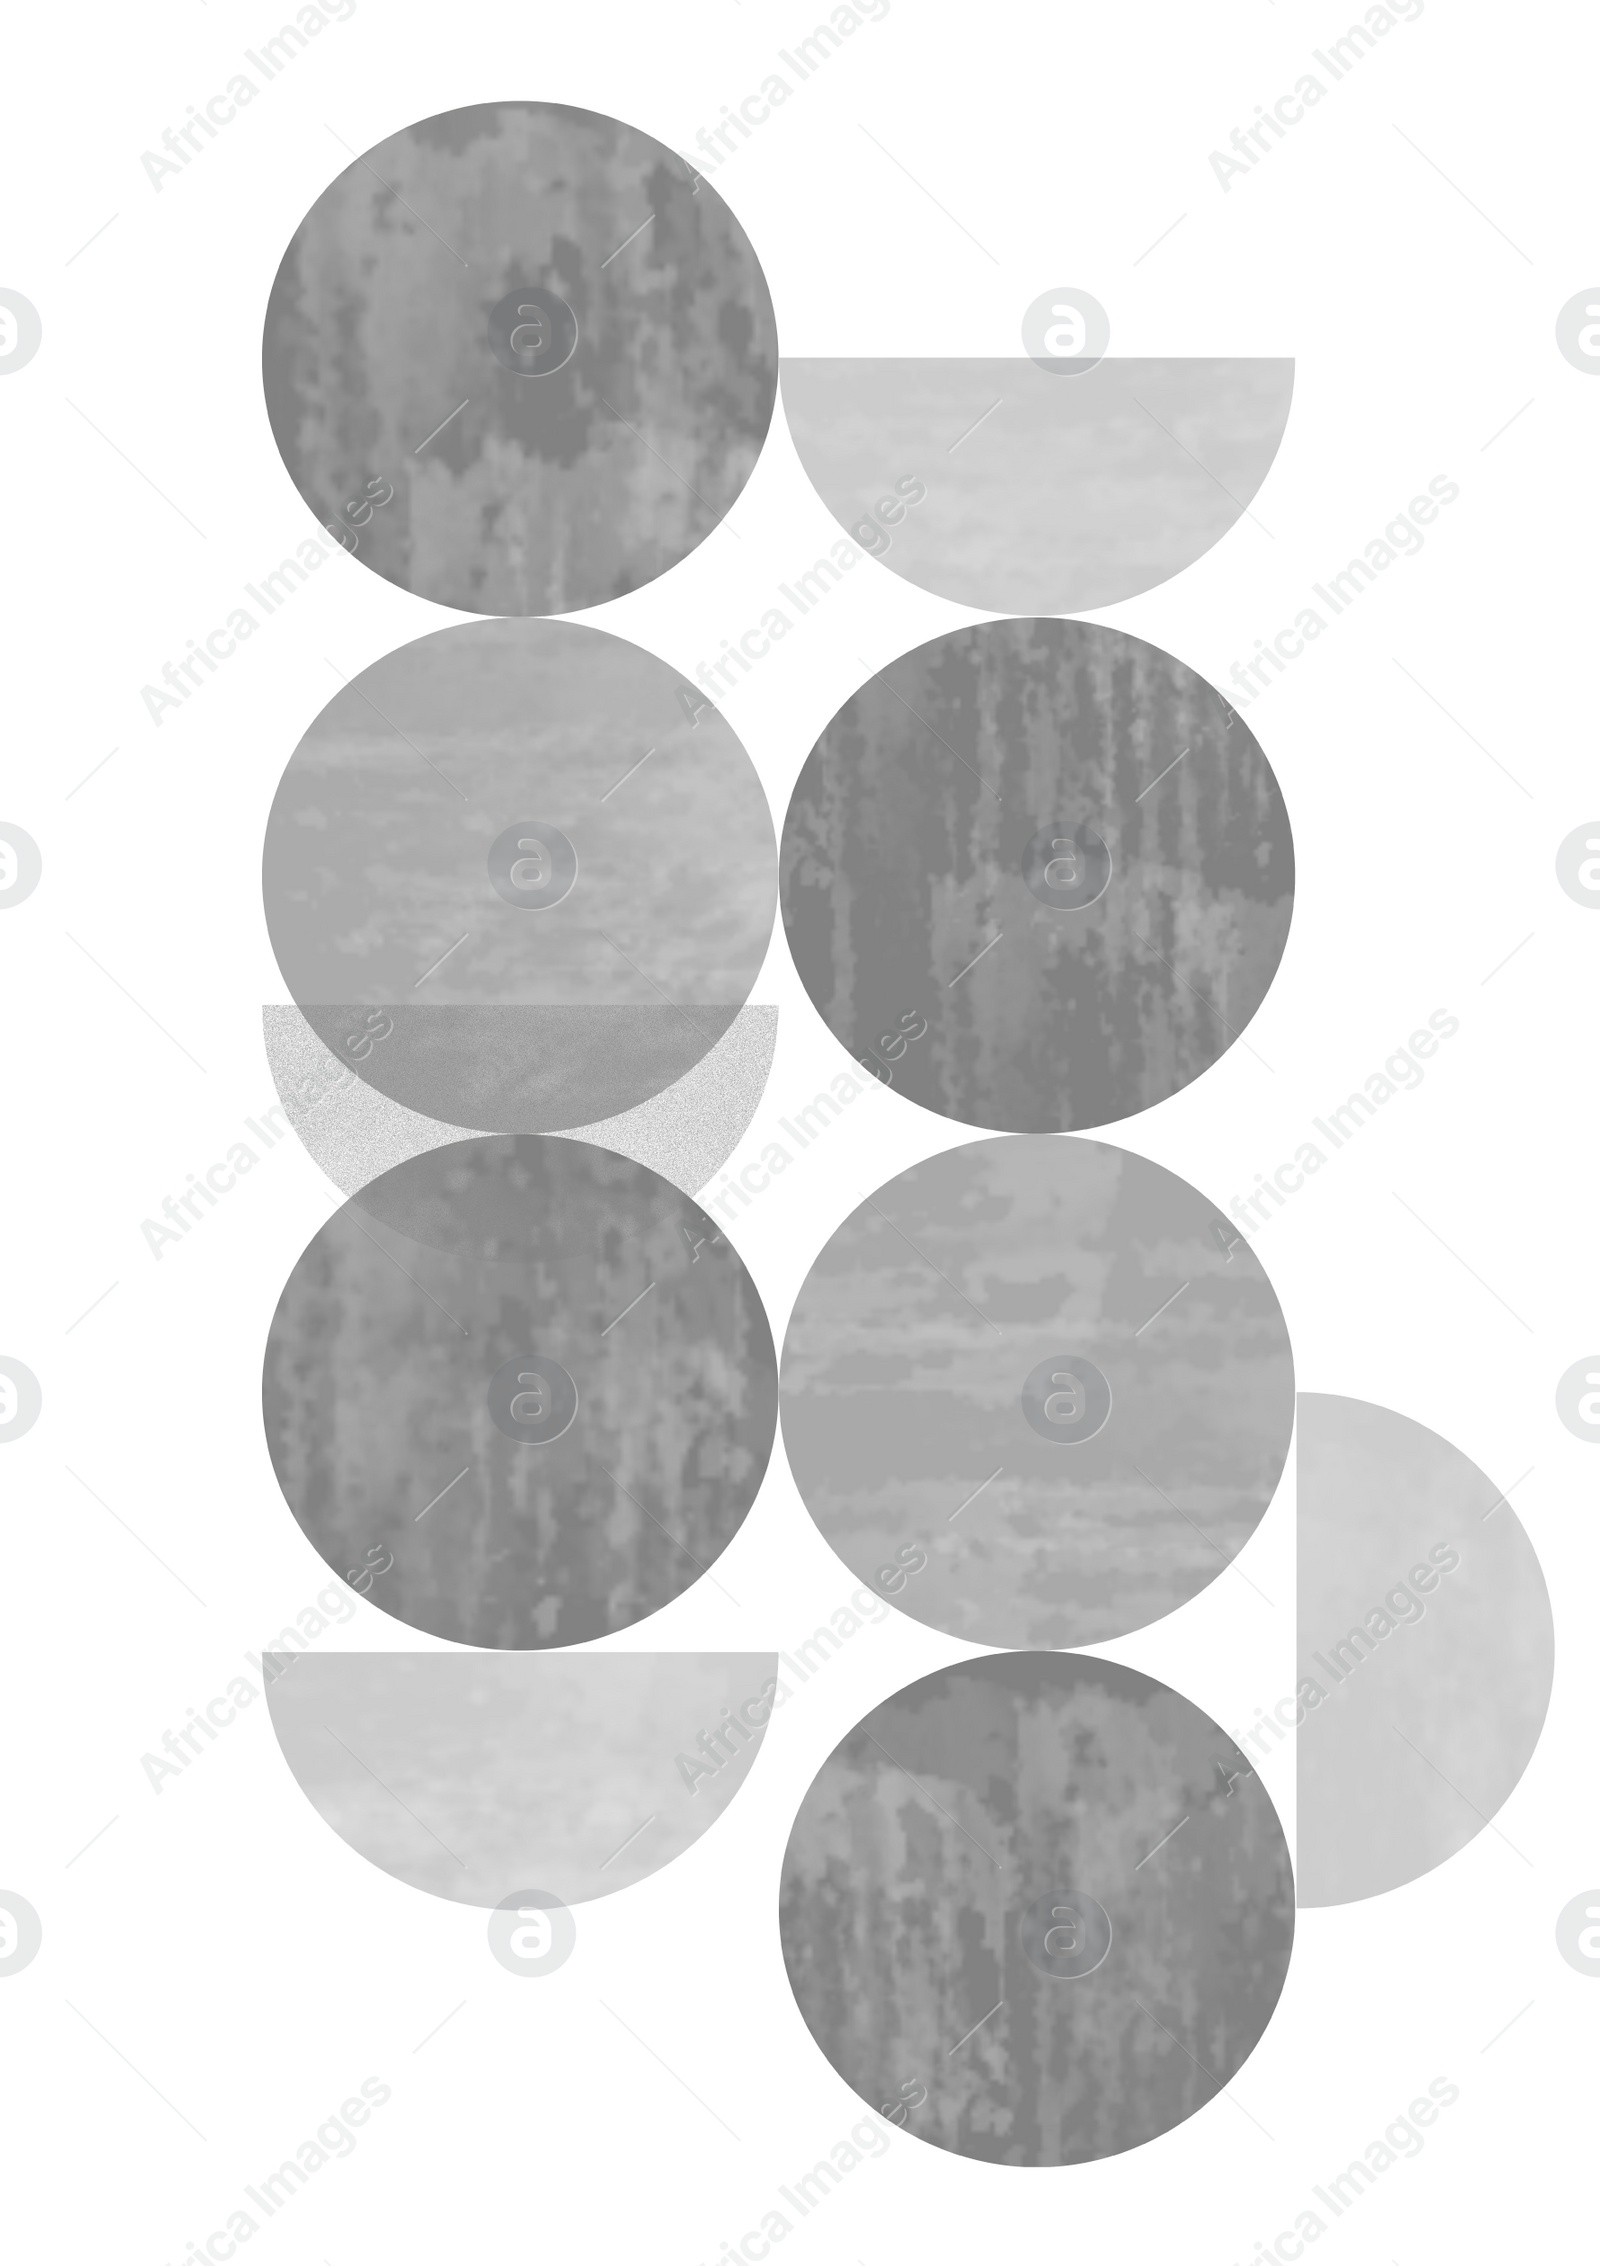 Illustration of Beautiful abstract image with geometric shapes in different shades of grey color